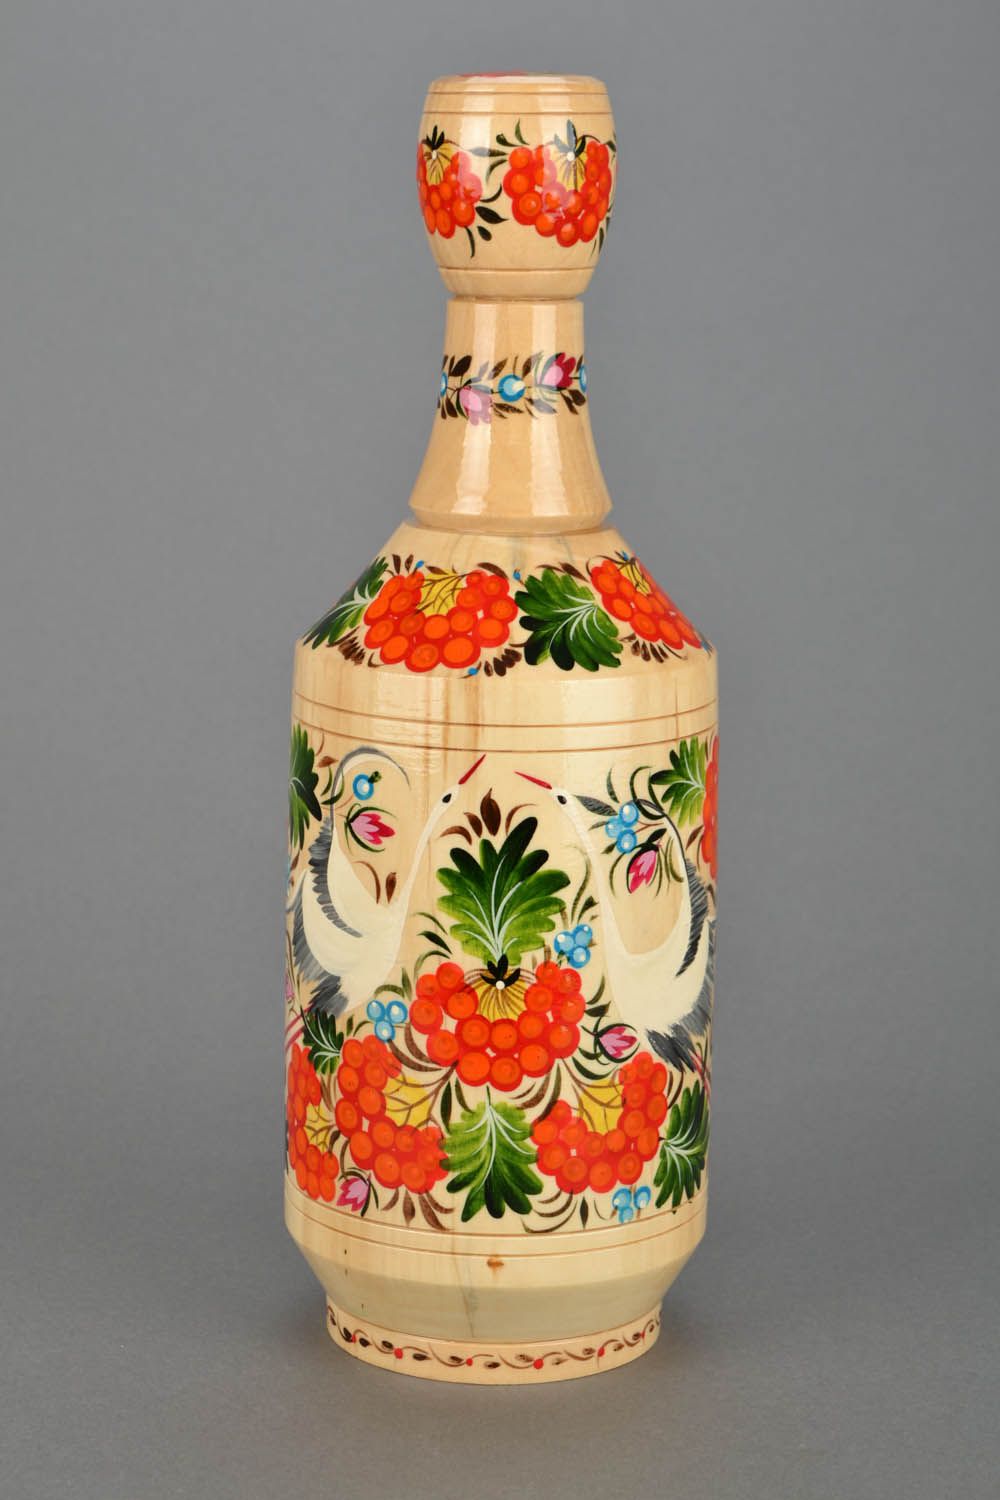 Homemade painted wooden bottle photo 4